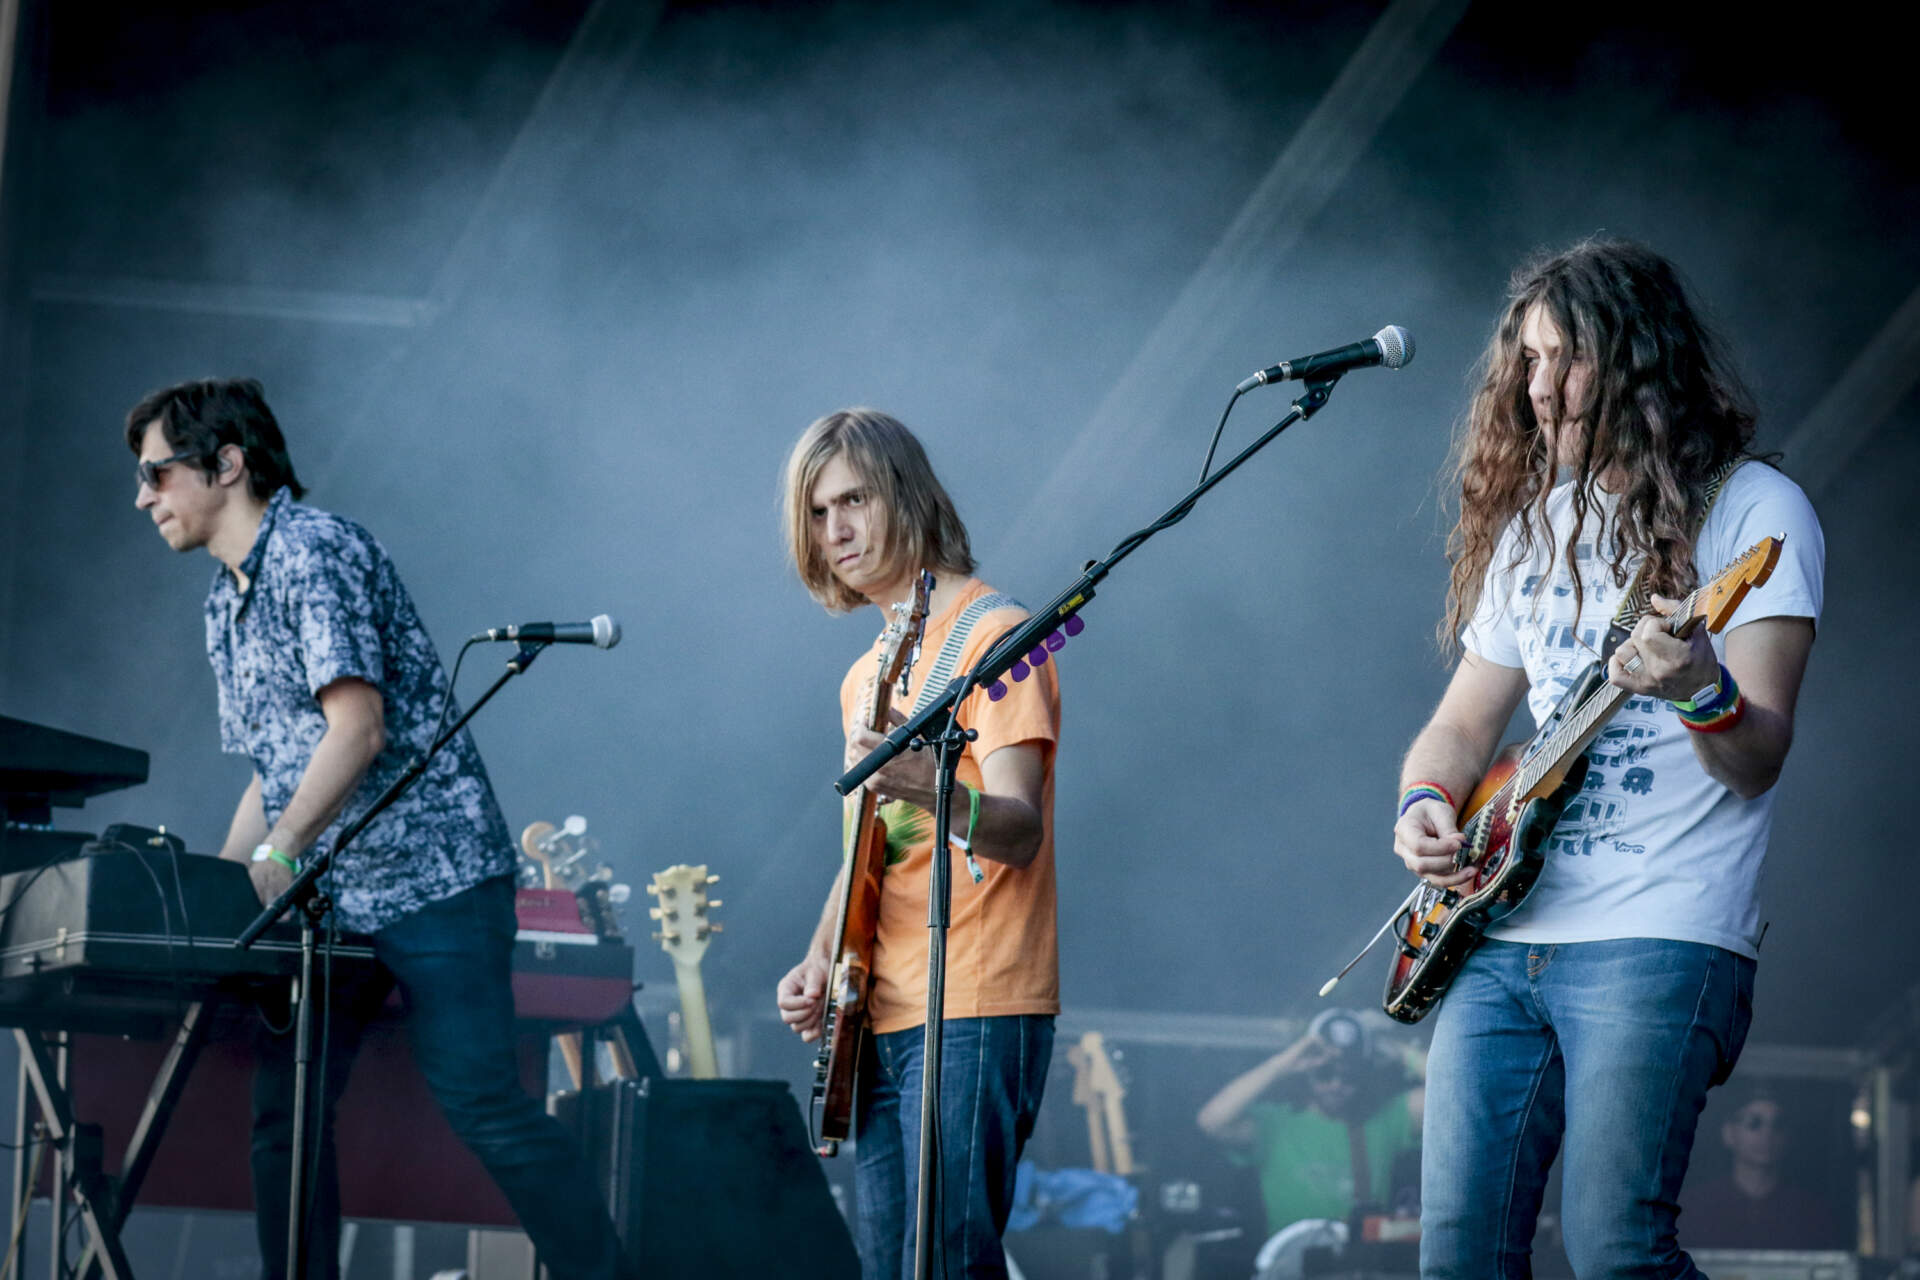 Jesse Trbovich, Rob Laakso and Kurt Vile perform with Kurt Vile and The Violators on Day 2 of the Osheaga Music and Art Festival at Parc Jean-Drapeau on July 30, 2016 in Montreal, Canada. (Courtesy Getty Images/WireImage; Photo by Mark Horton)